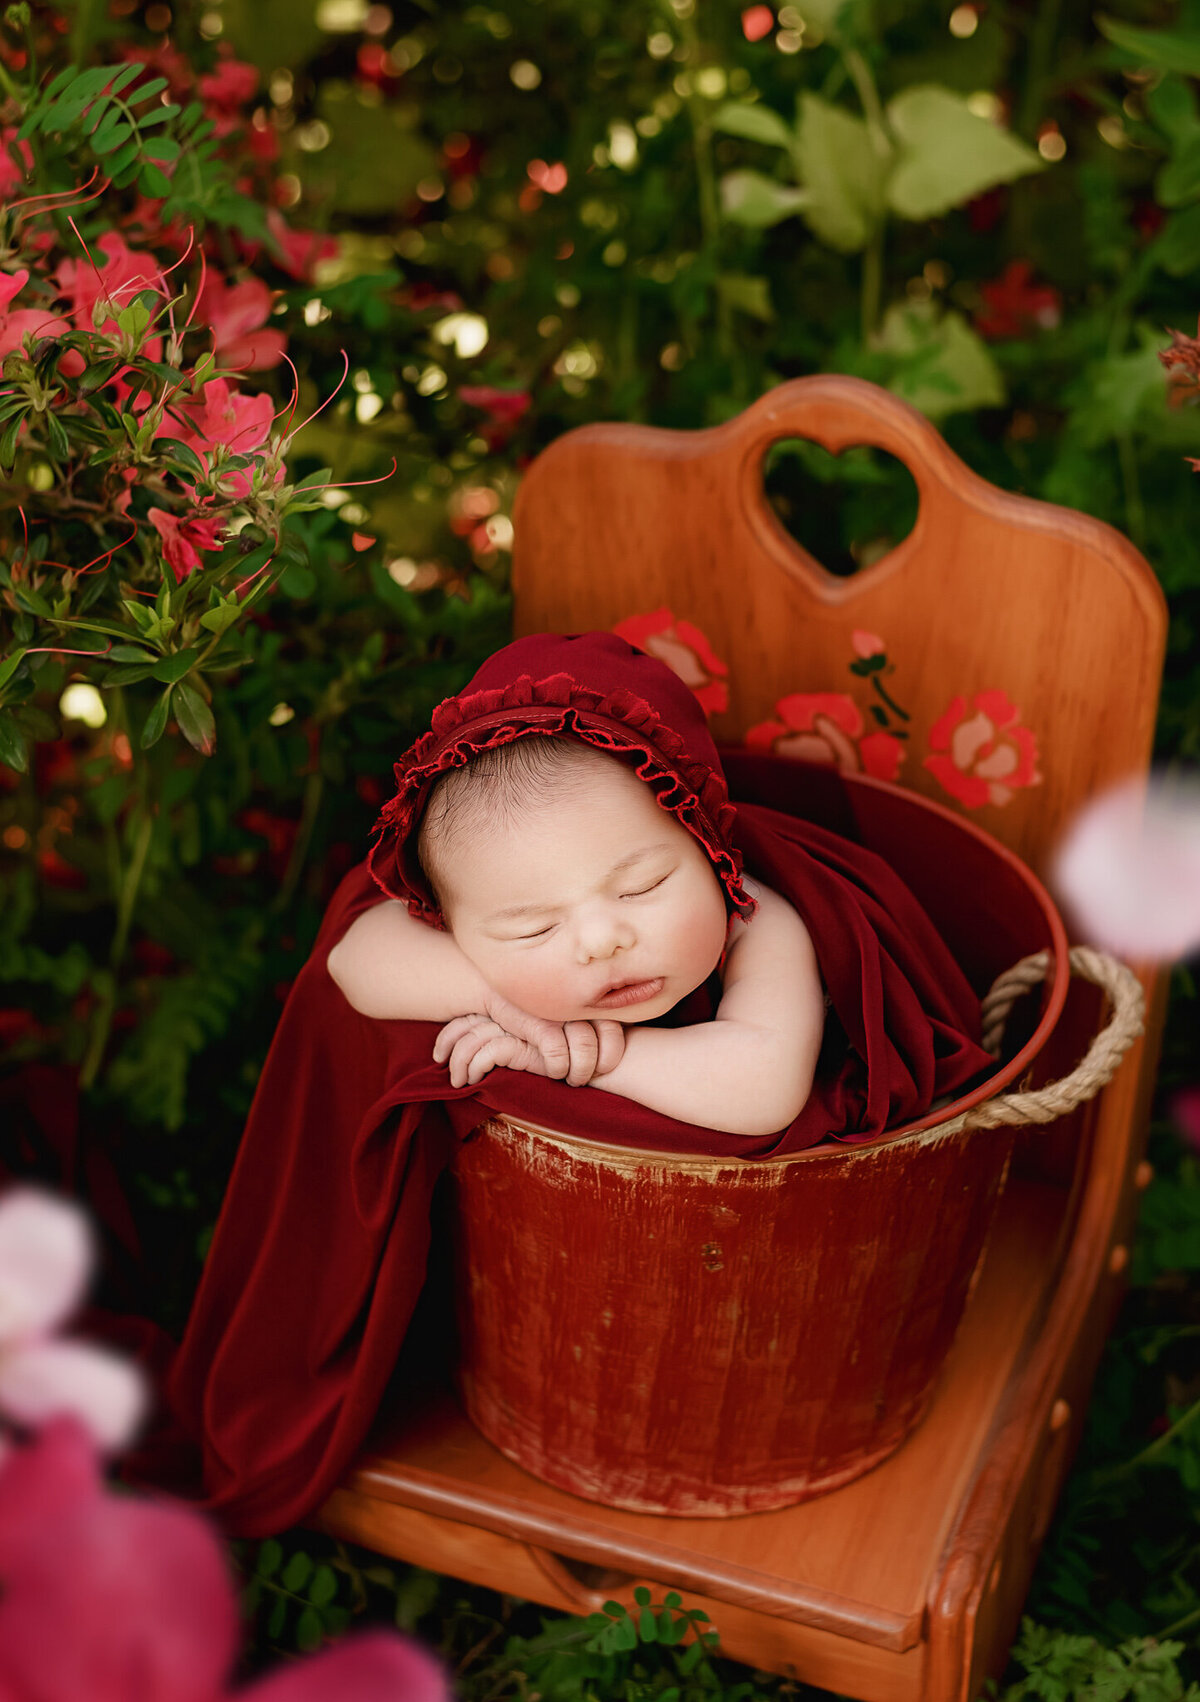 Outdoor photography session of infant girl  wearing a red hat in a bucket surrounded by flowers in  Vineland, Ontario.